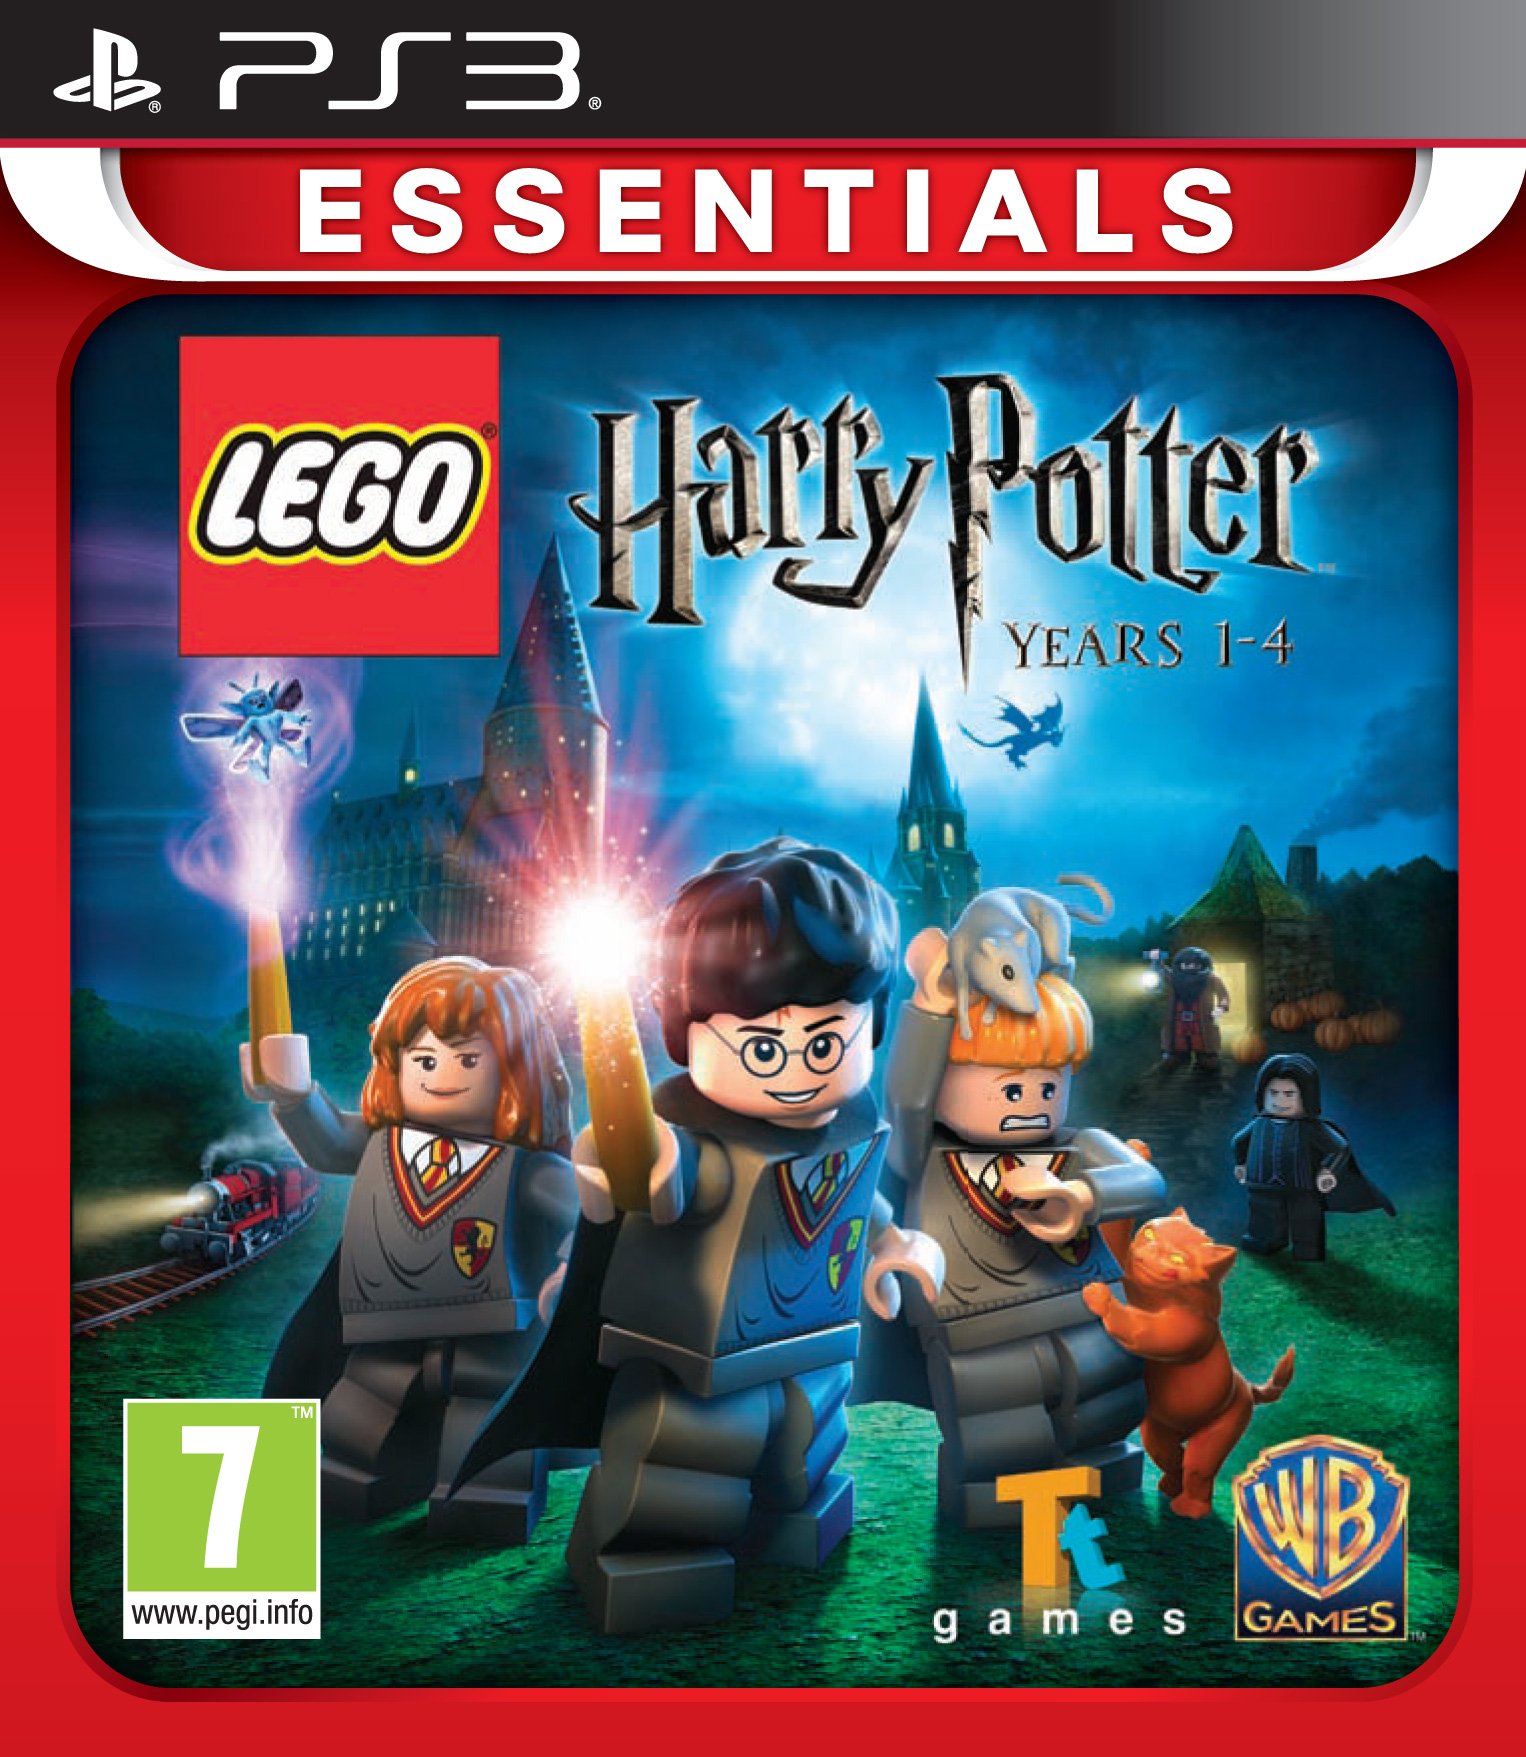 Buy LEGO Harry Potter: Years 1-4 (Essentials) - Incl. shipping